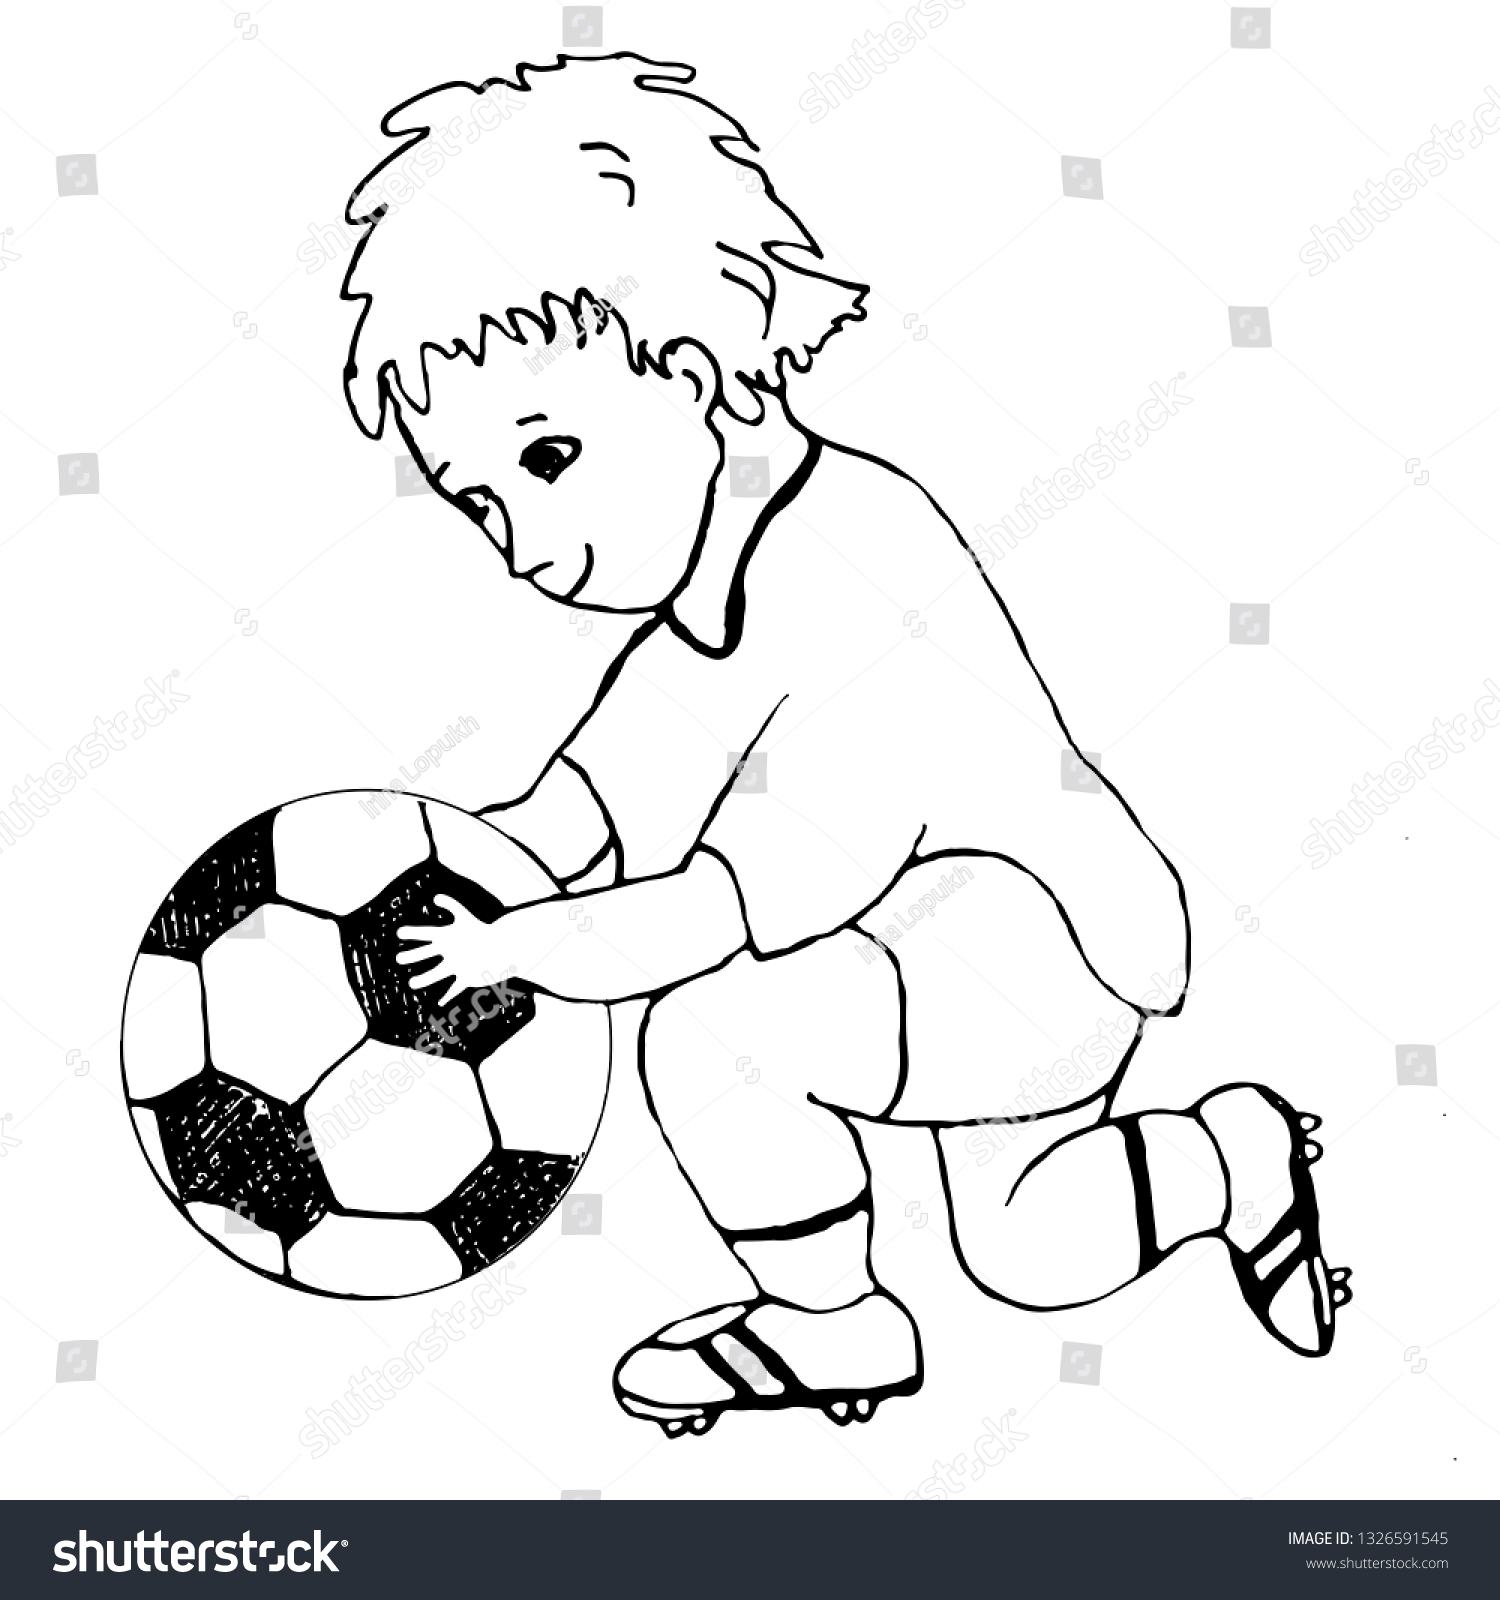 Toddler Boy Soccer Ball Line Drawing Stock Vector Royalty Free